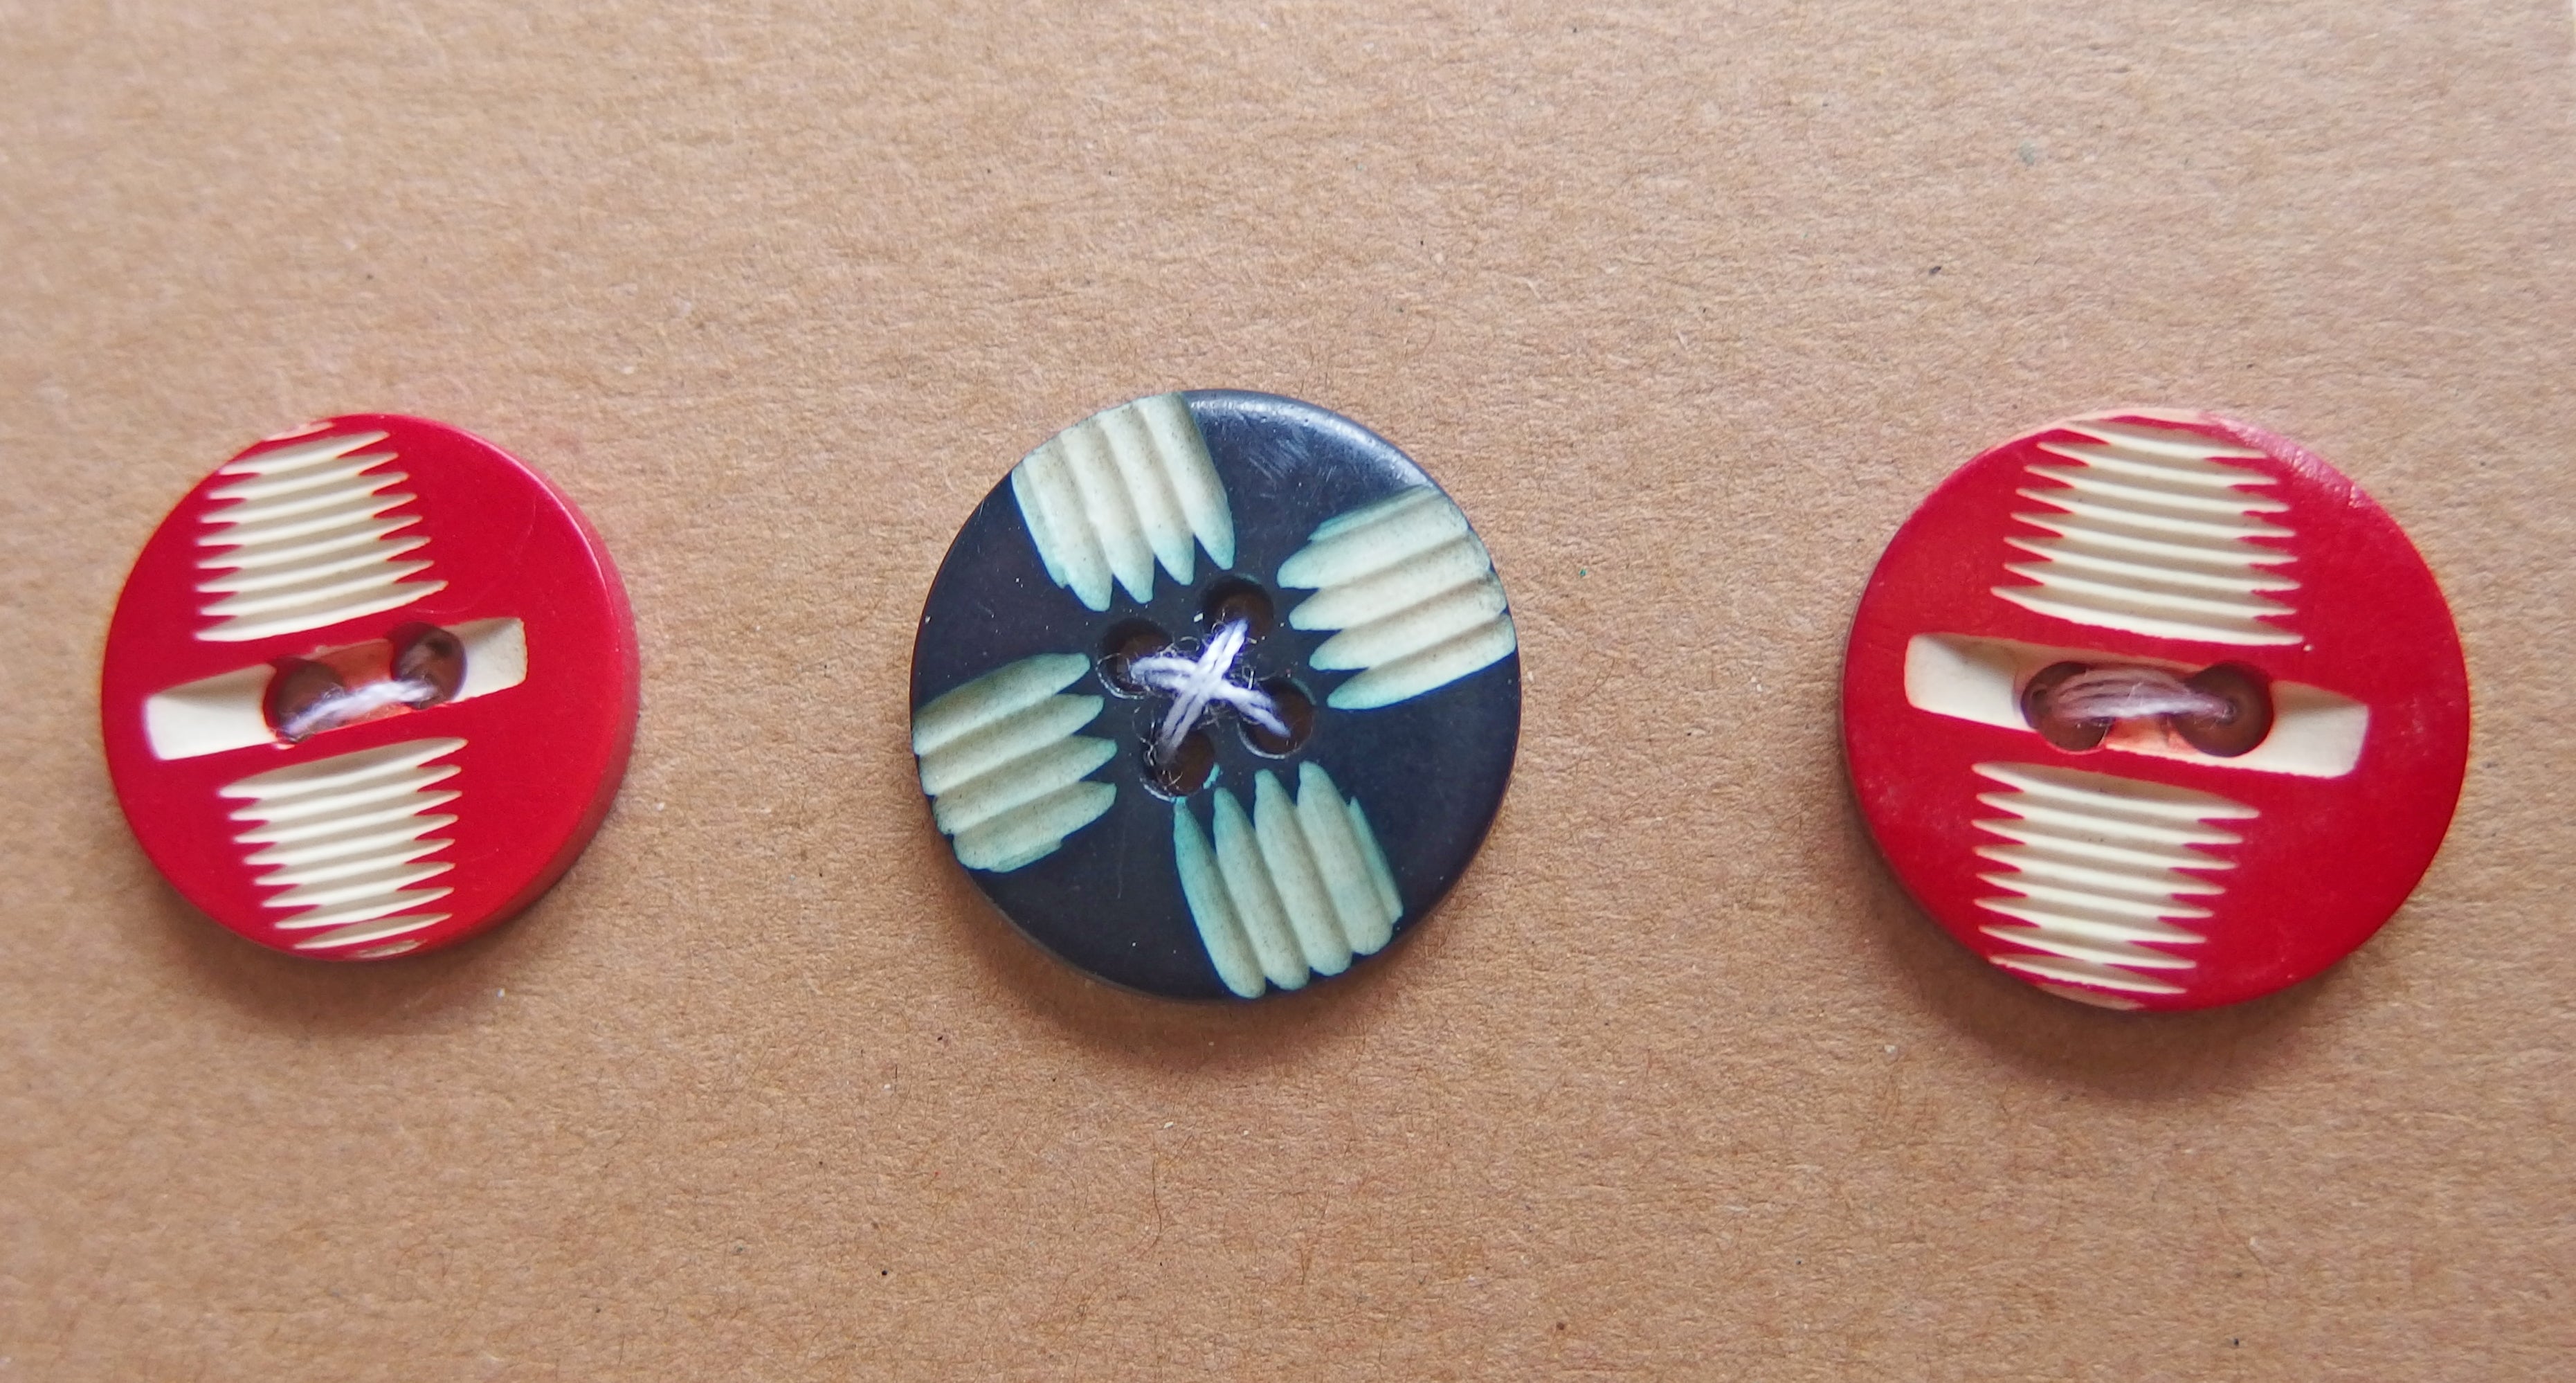 Vintage Buttons: Red, Blue and White